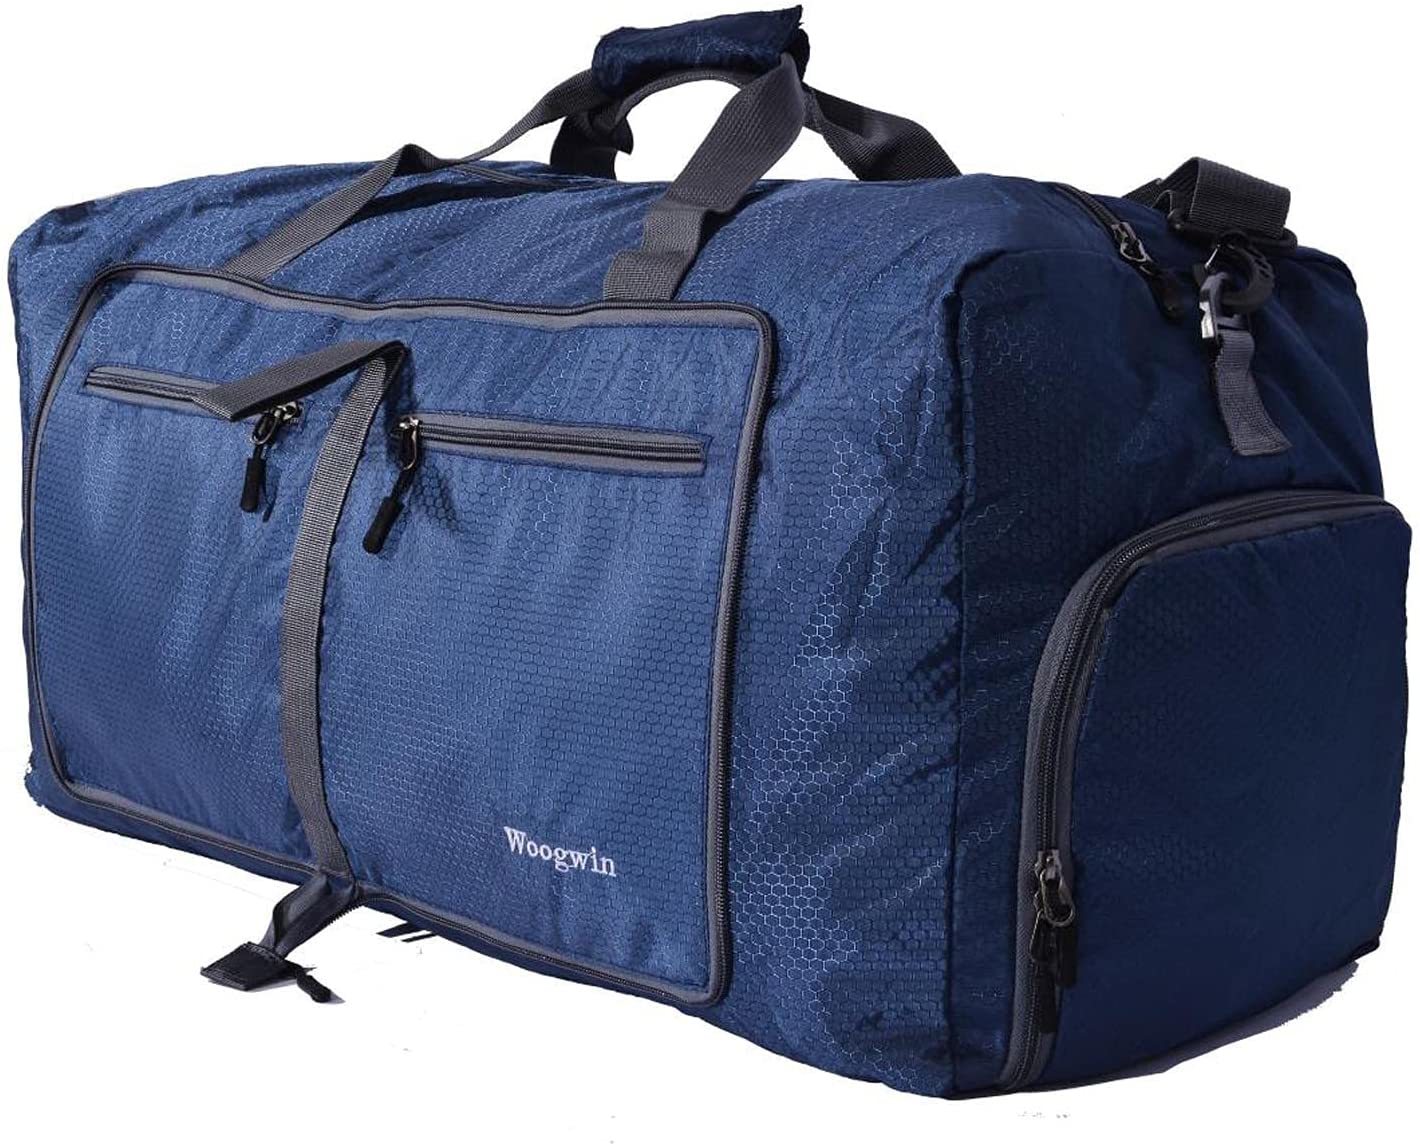 Primary image for Woogwin Travel Duffel Bag 60L New Darkblue Large Foldable Waterproof Overnight